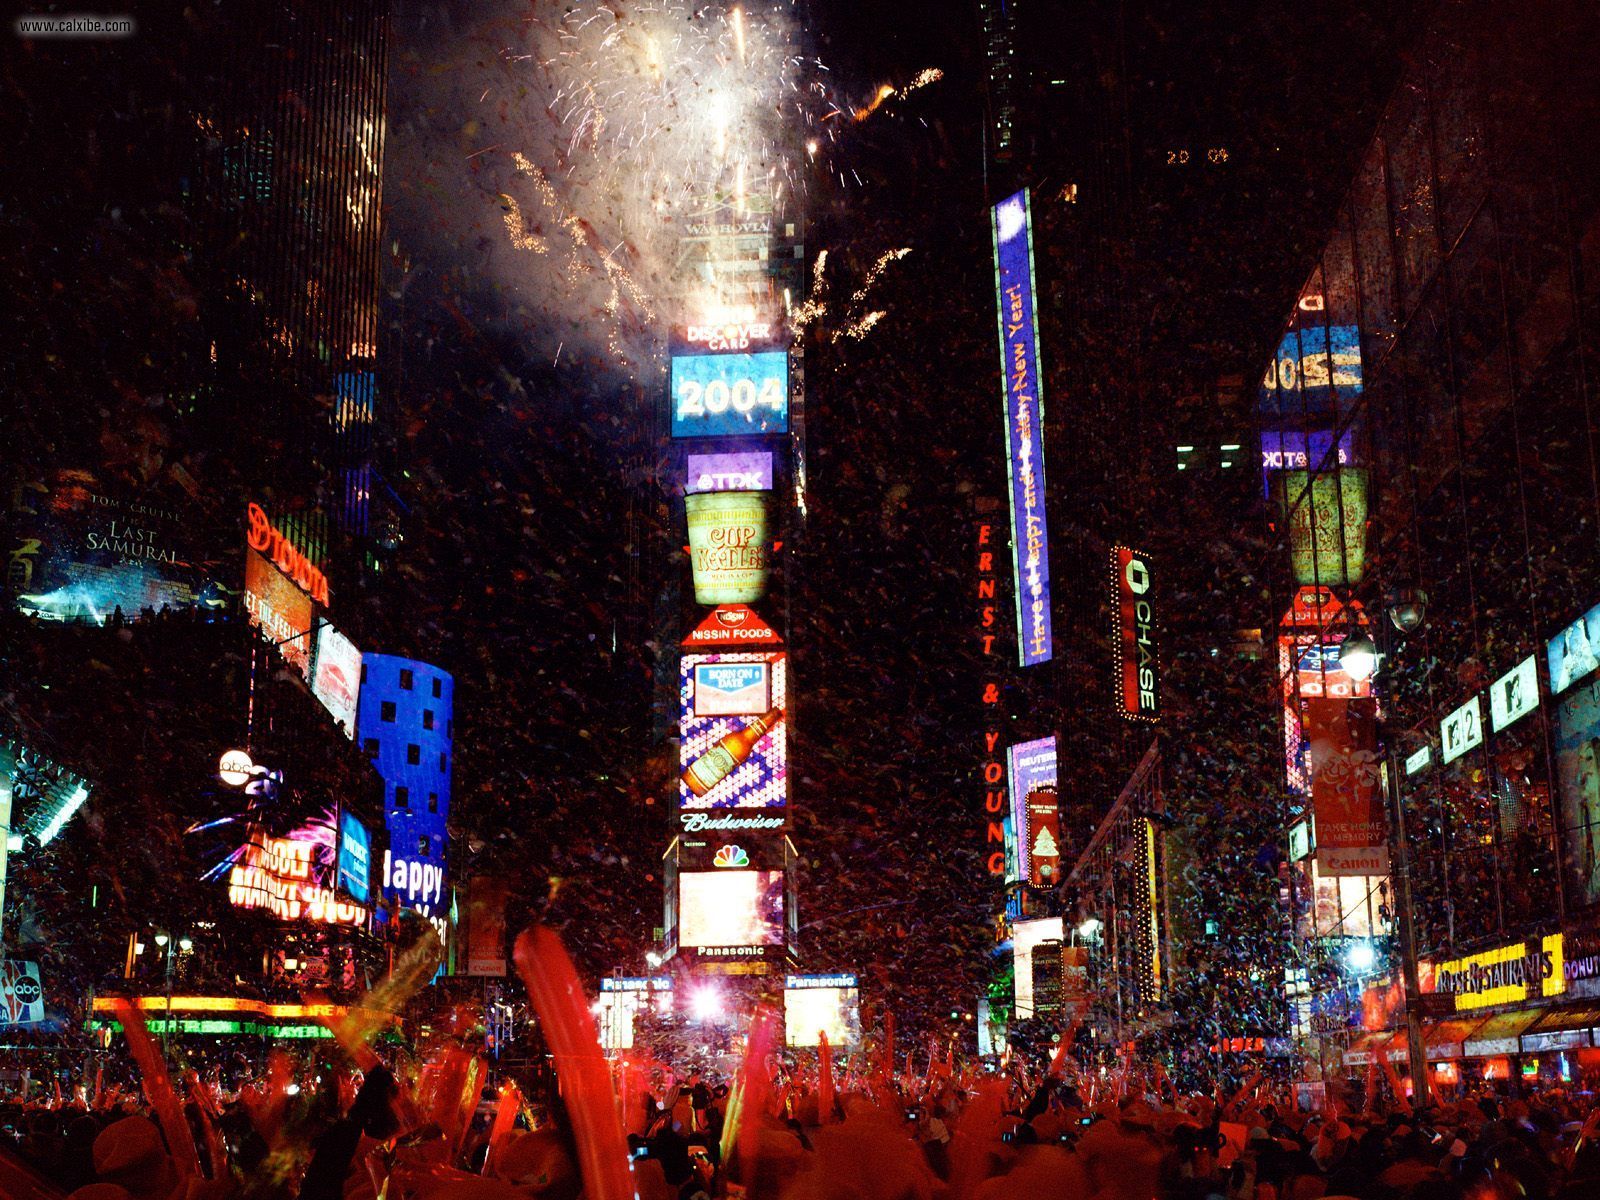 amp City Times Square Celebration New York City picture nr 20622